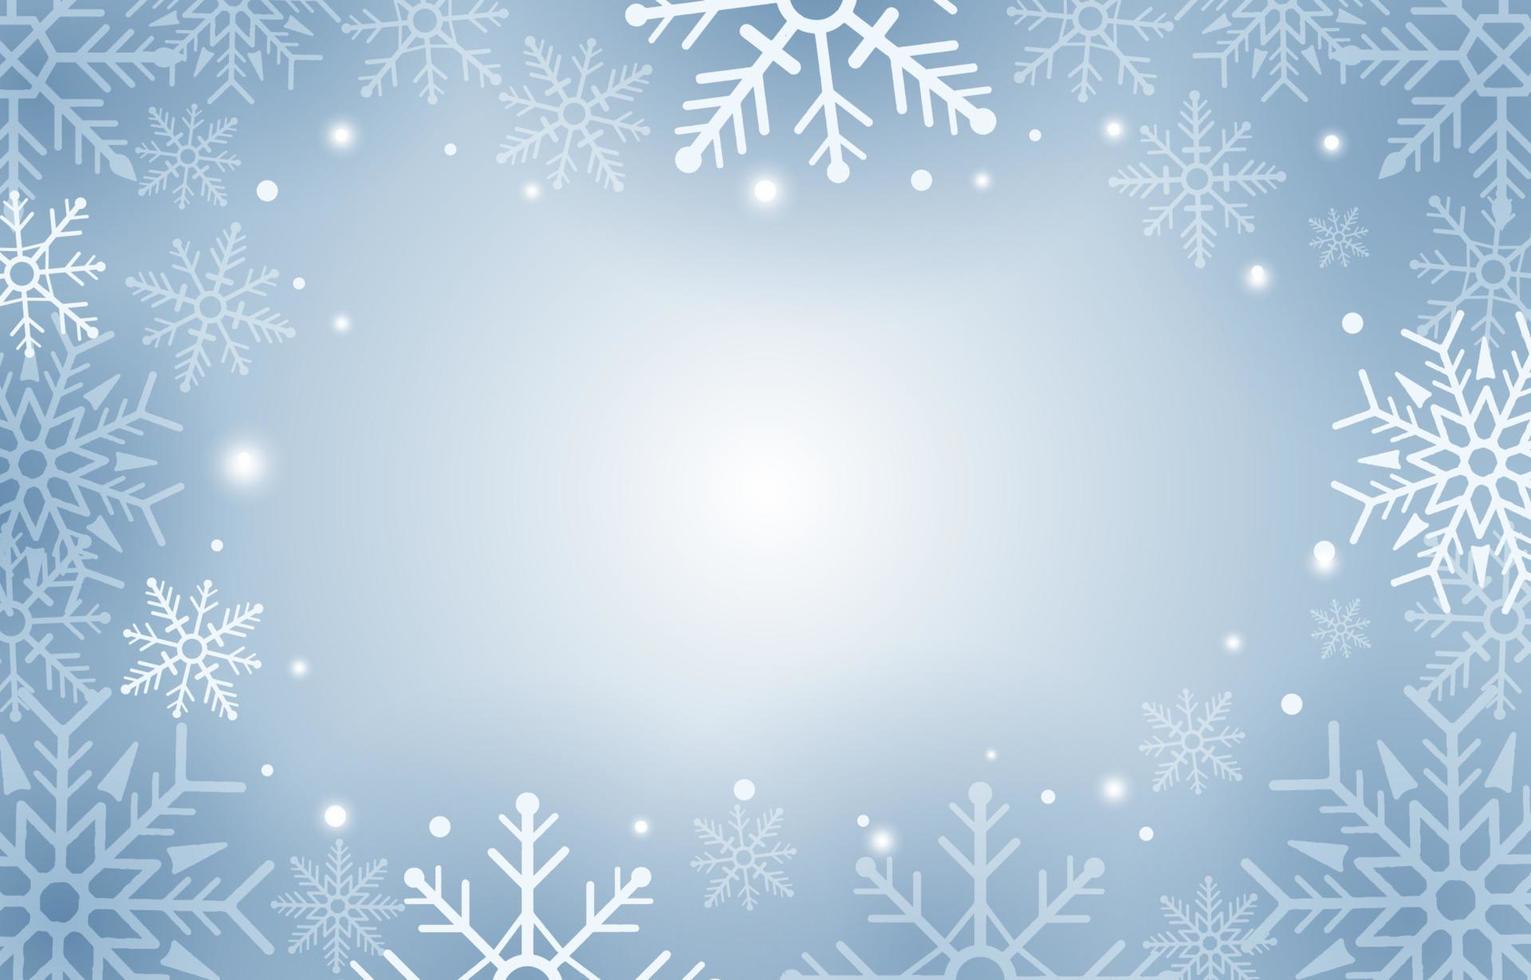 Winter Snowflakes Background vector